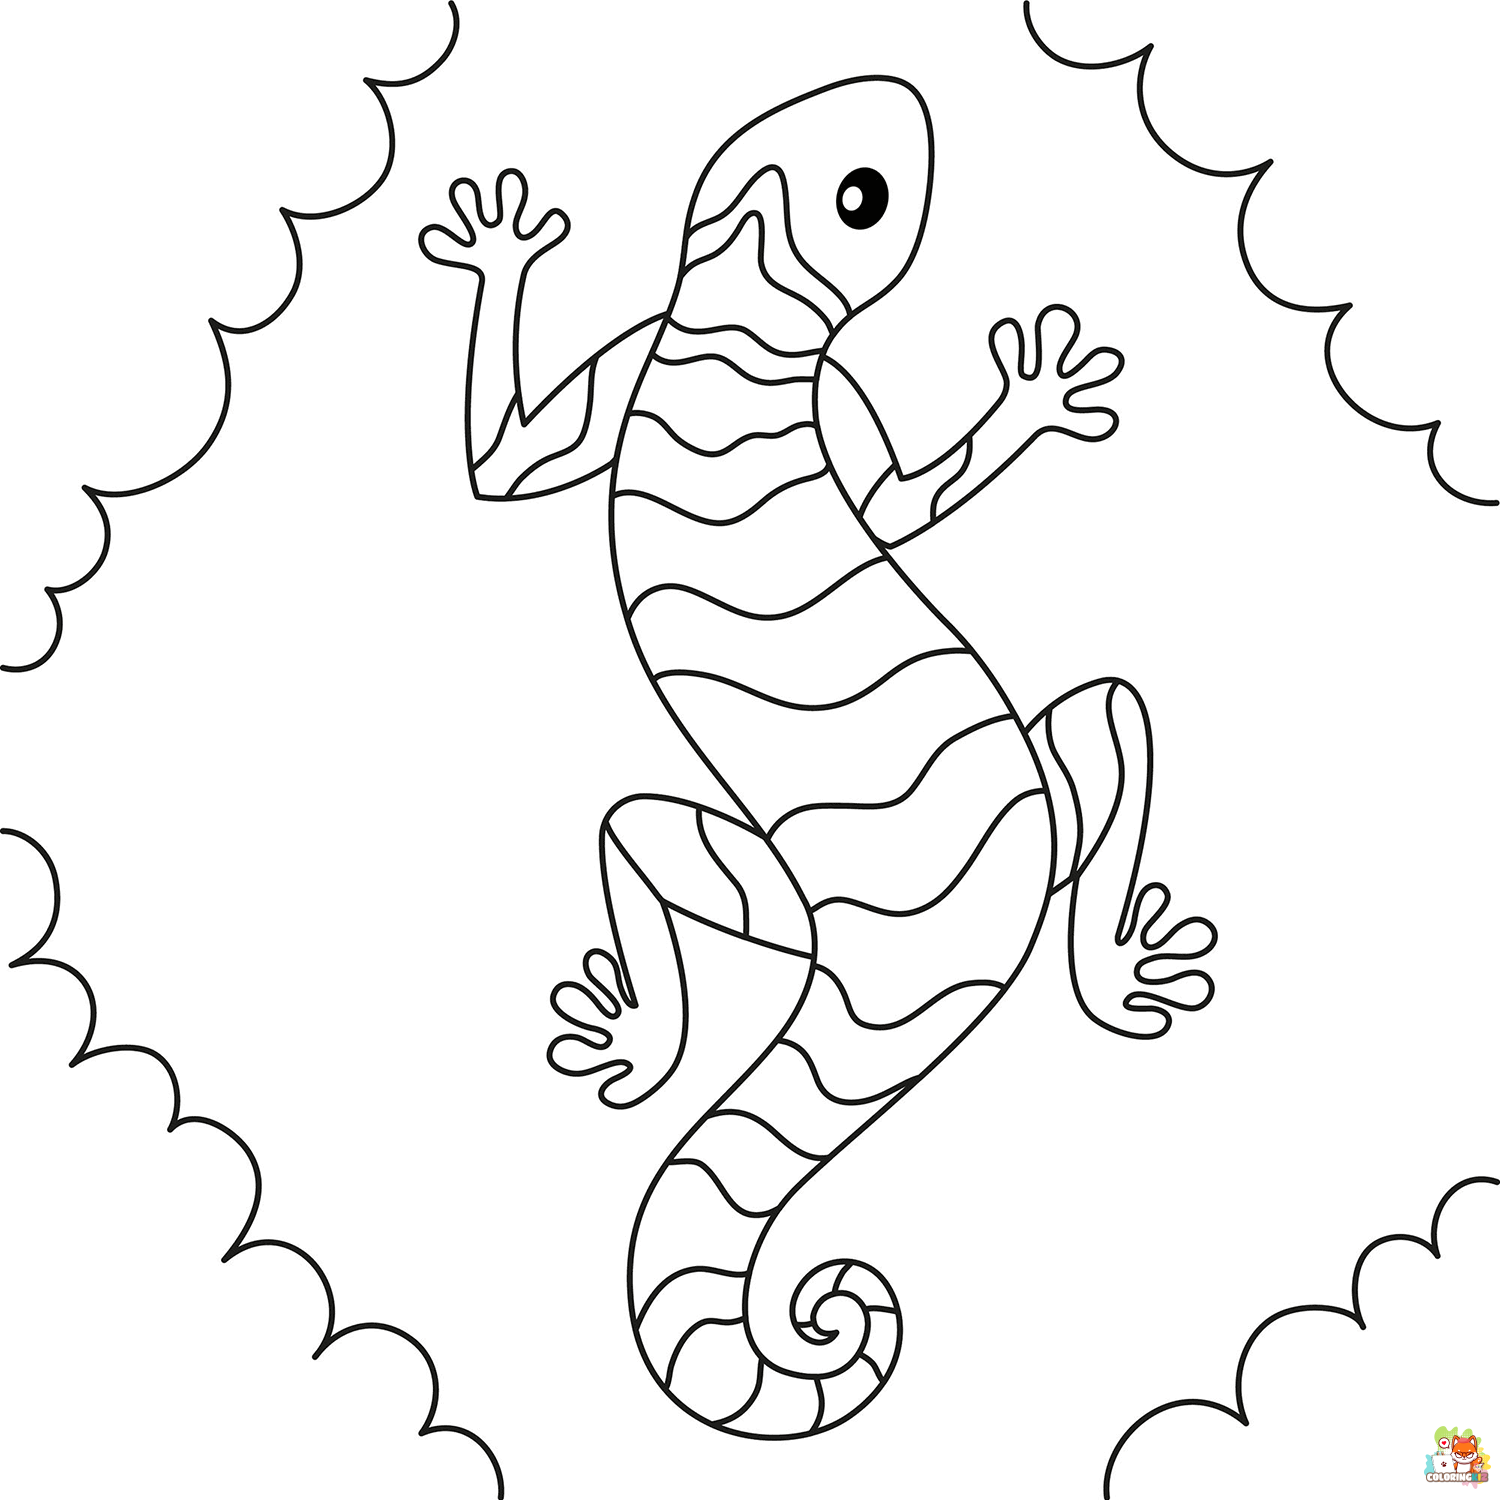 Free Lizard coloring pages for kids 2